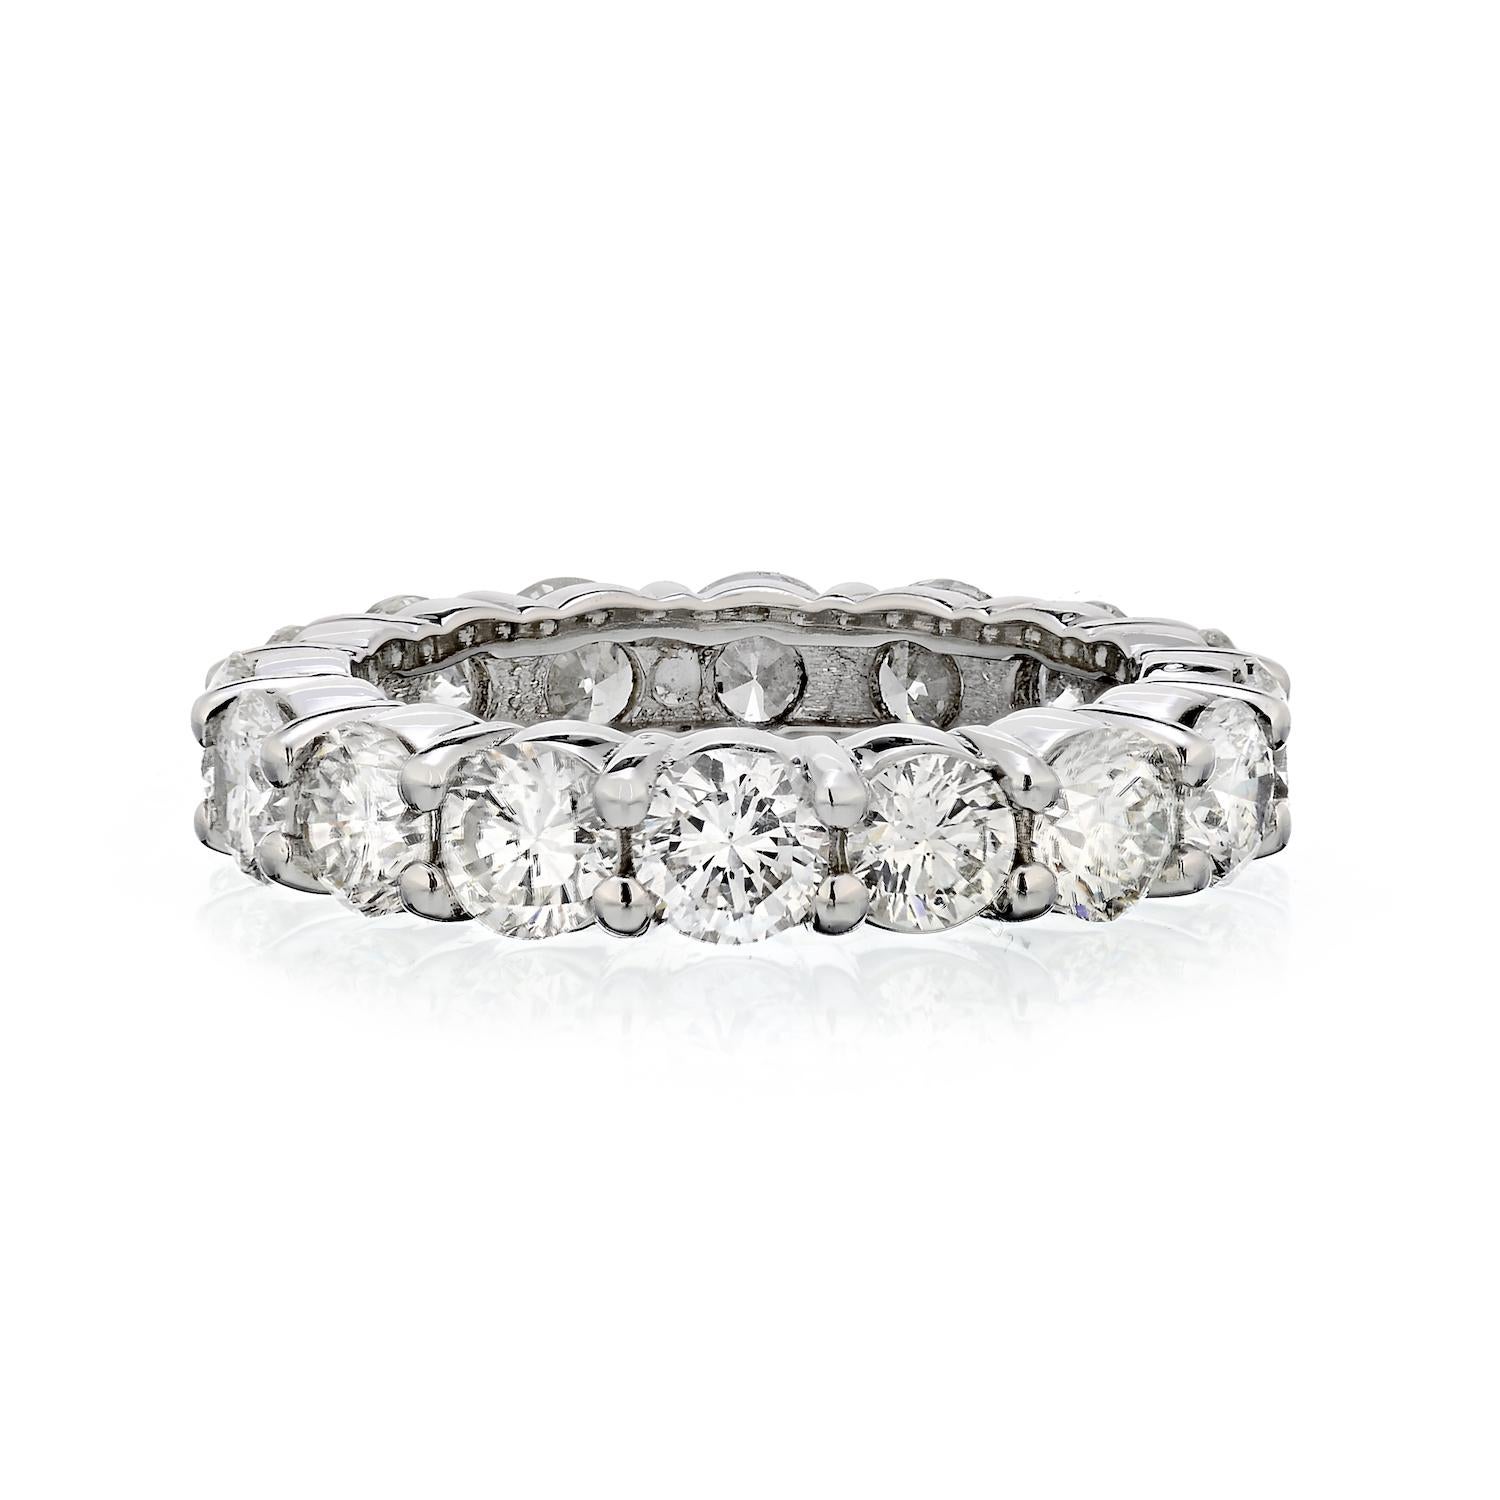 Custom made shared prong diamond eternity band crafted in Platinum set with round brilliant cut diamonds. Total carat weight of 4.96 carats. 
Finger size 6.25. 